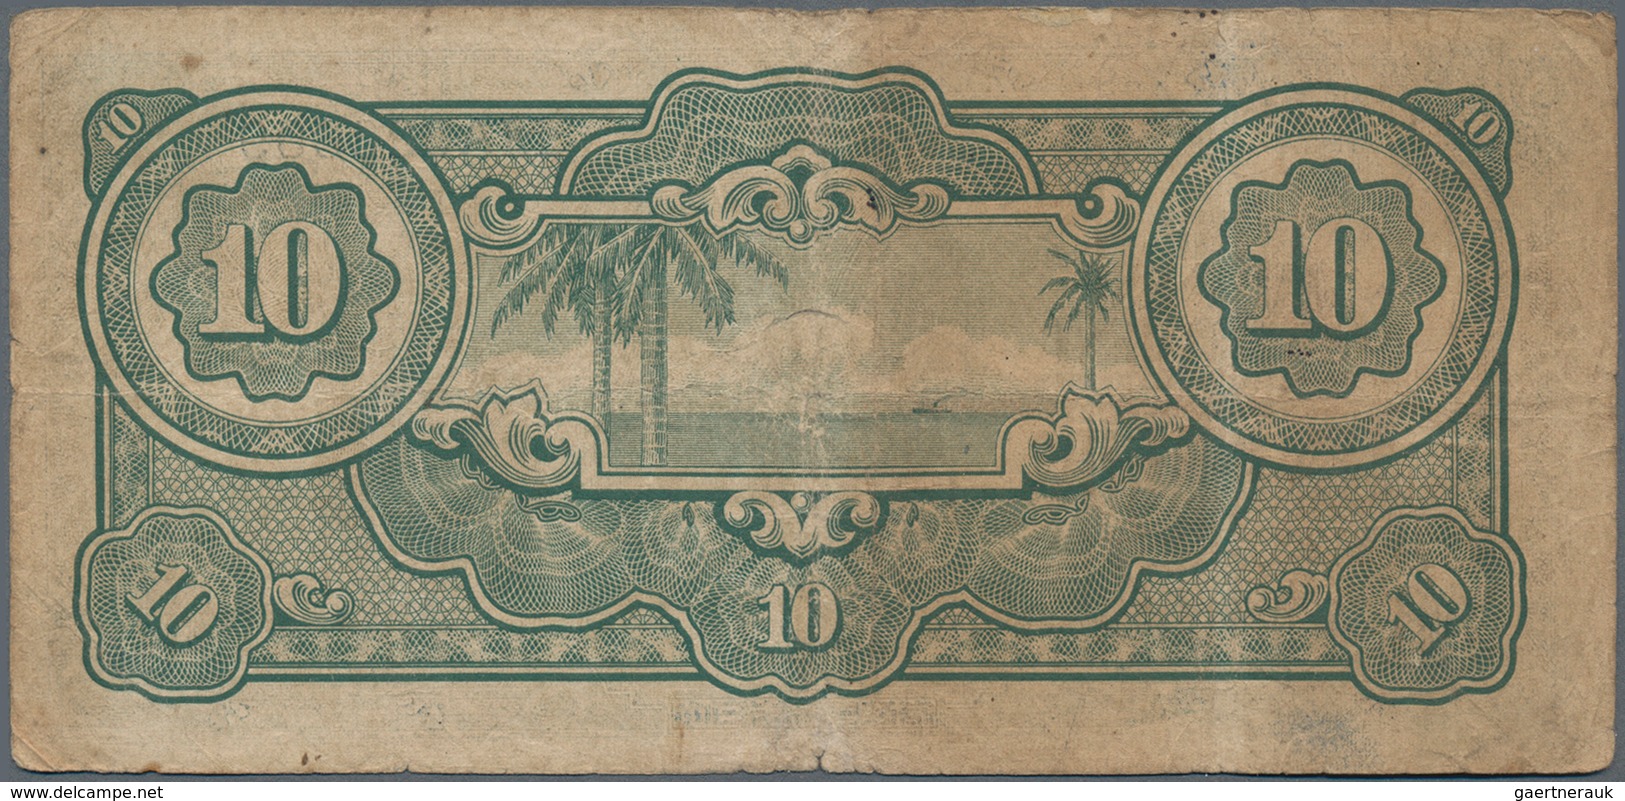 Malaya: The Japanese Government Set With 4 Banknotes 10 Dollars ND(1942-44), P.M7a In F-/F Condition - Malaysia